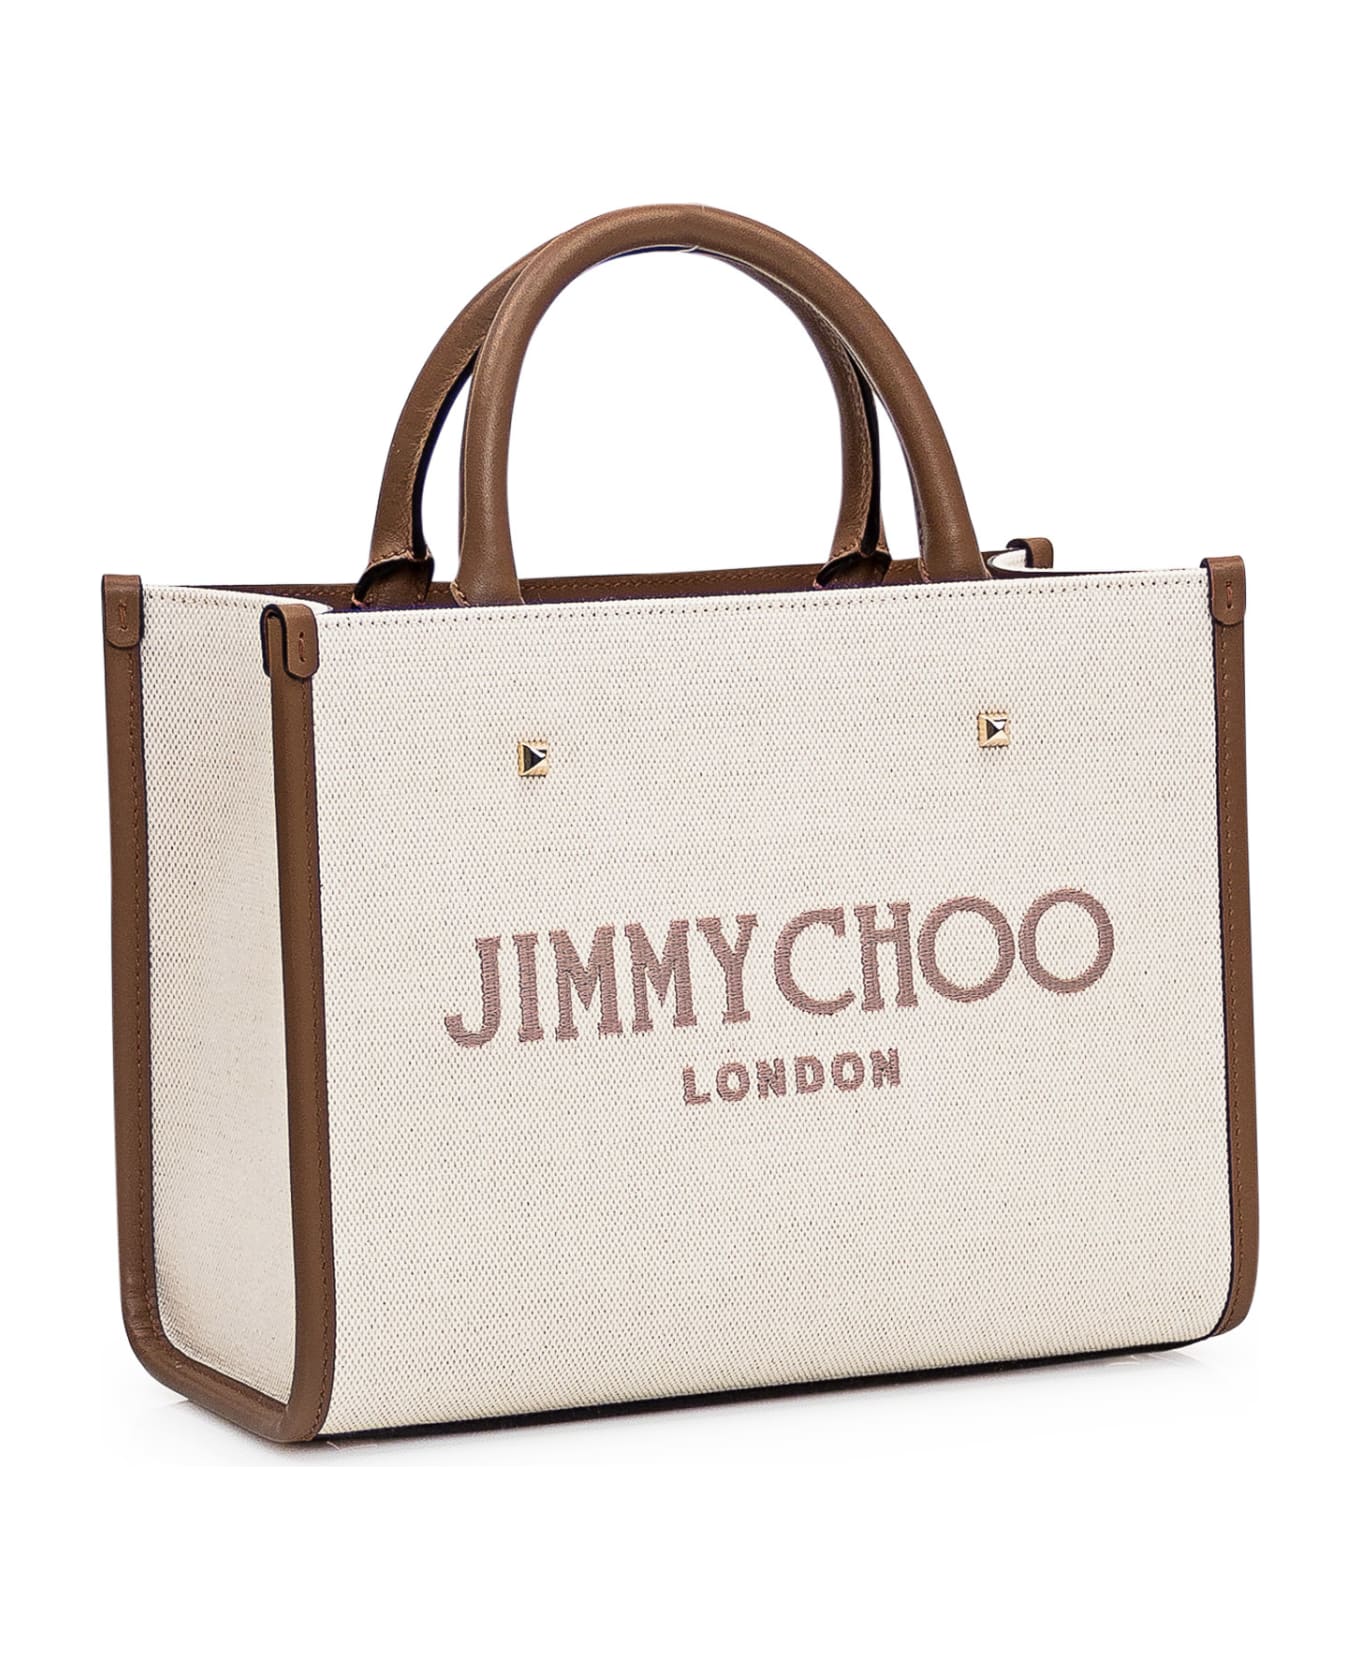 Jimmy Choo Avenue S Tote Bag - NATURAL/TAUPE/DARK TAN/LIGHT GOLD トートバッグ